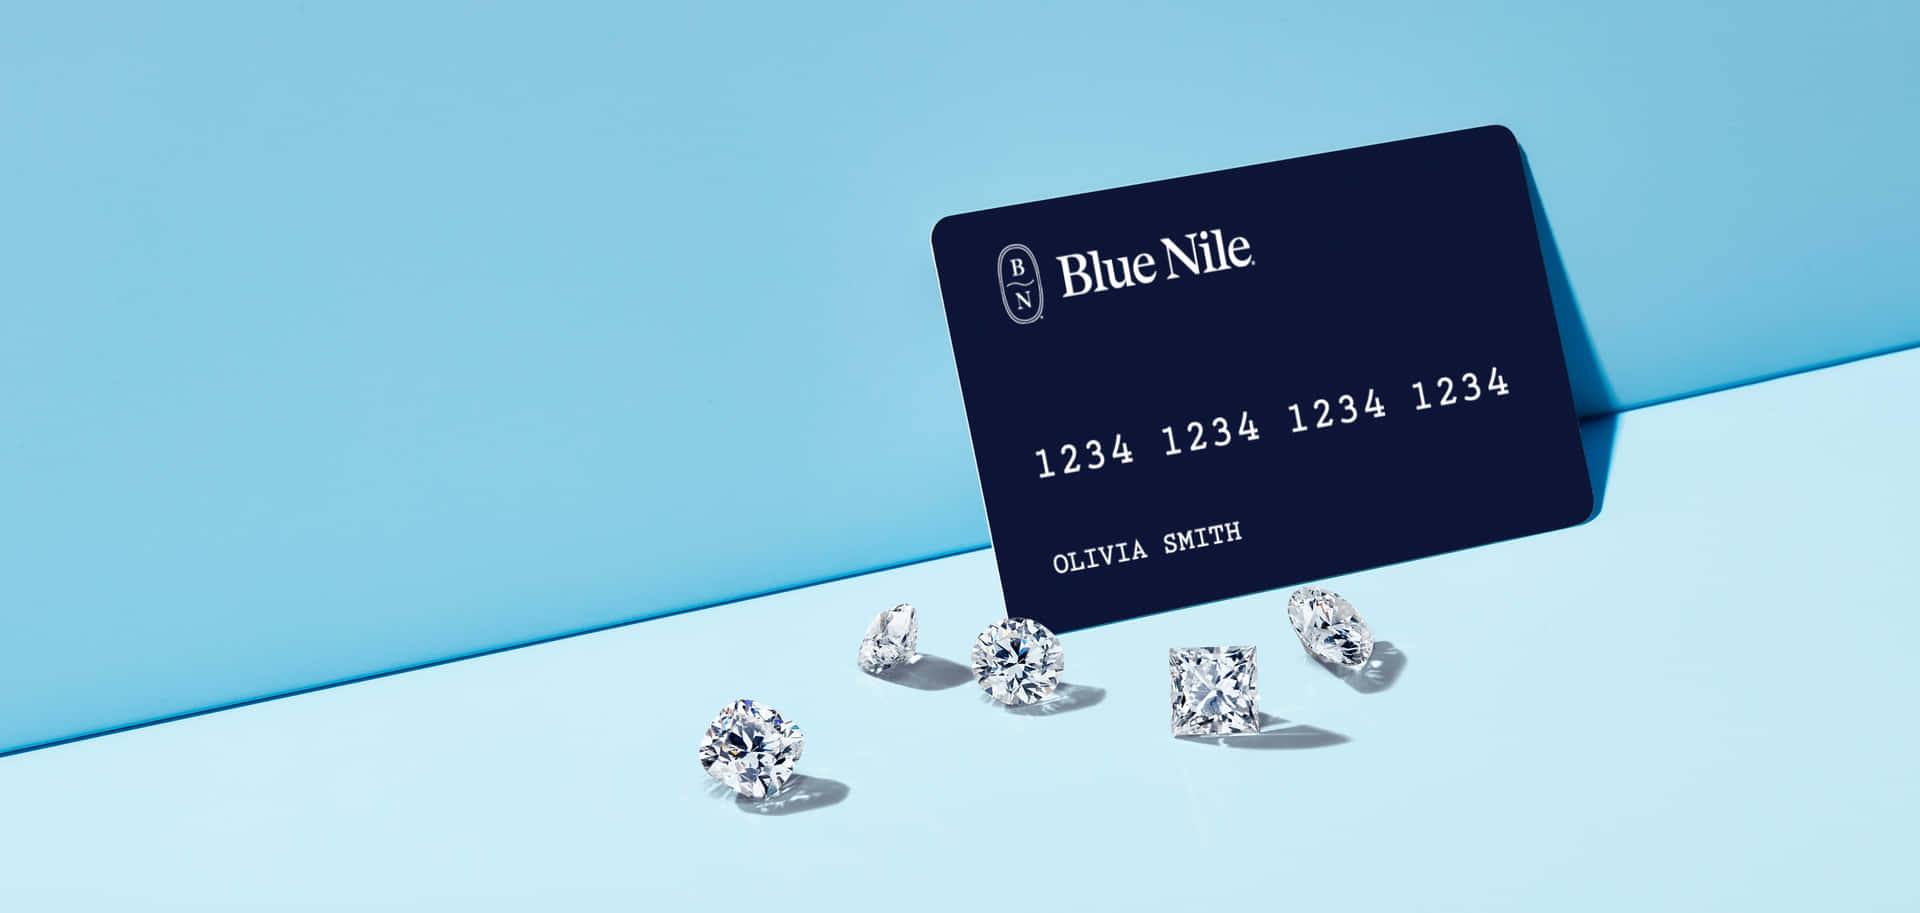 A Credit Card With Diamonds On It